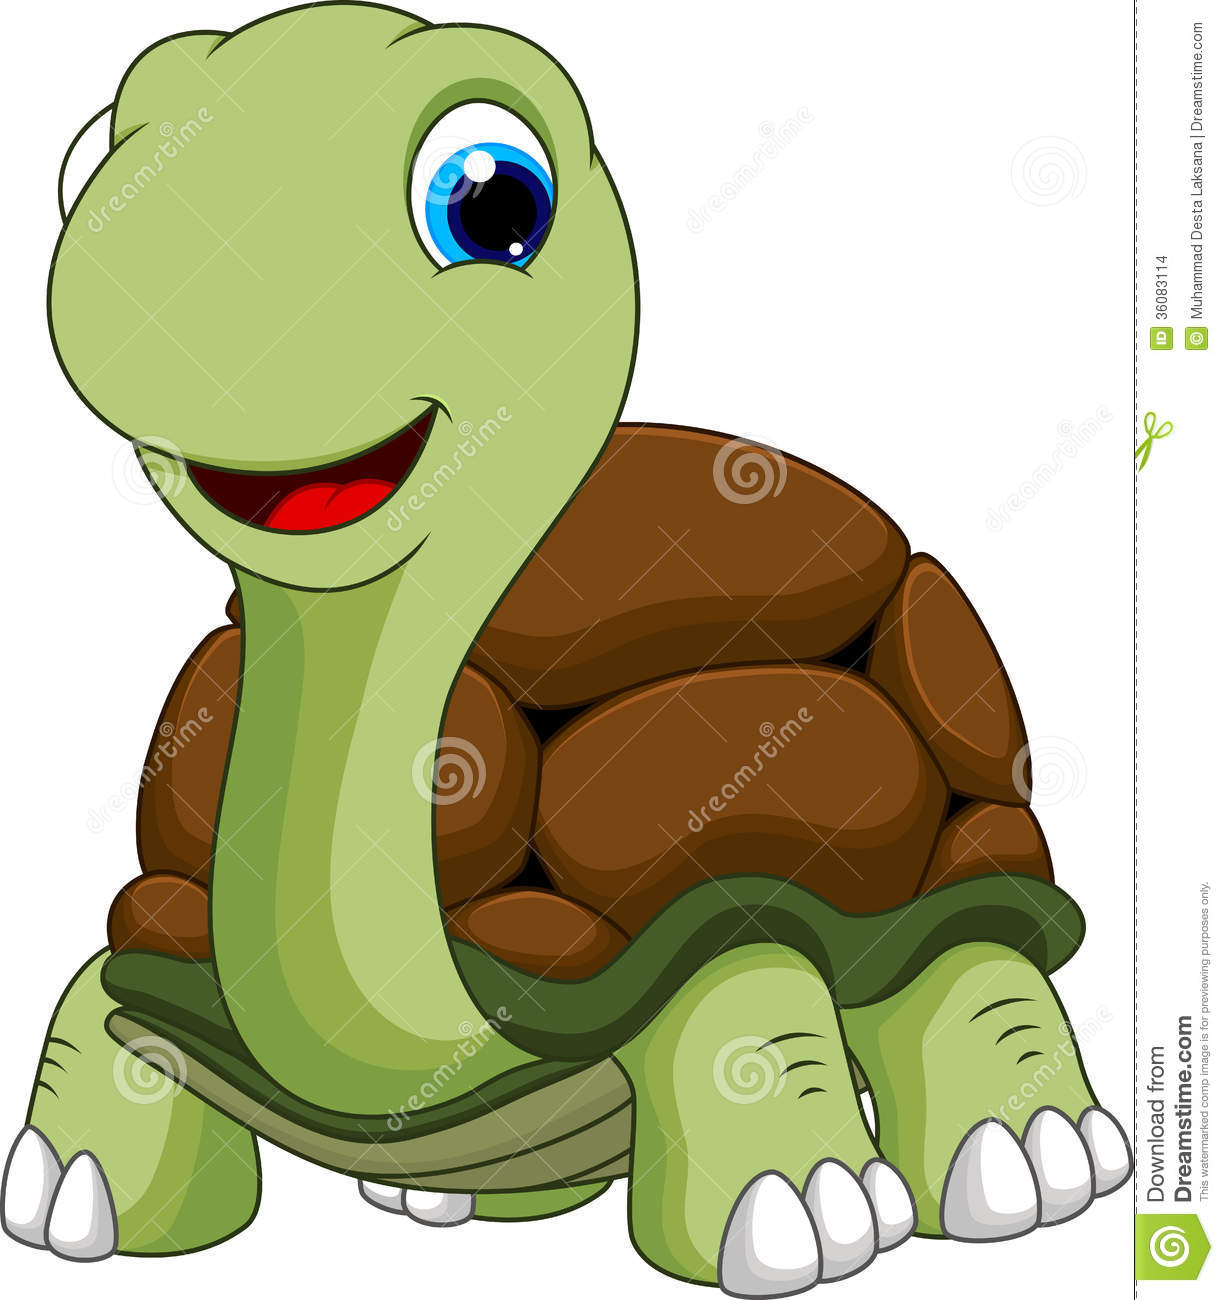 Funny Turtle Cartoon Stock Images   Image  36083114